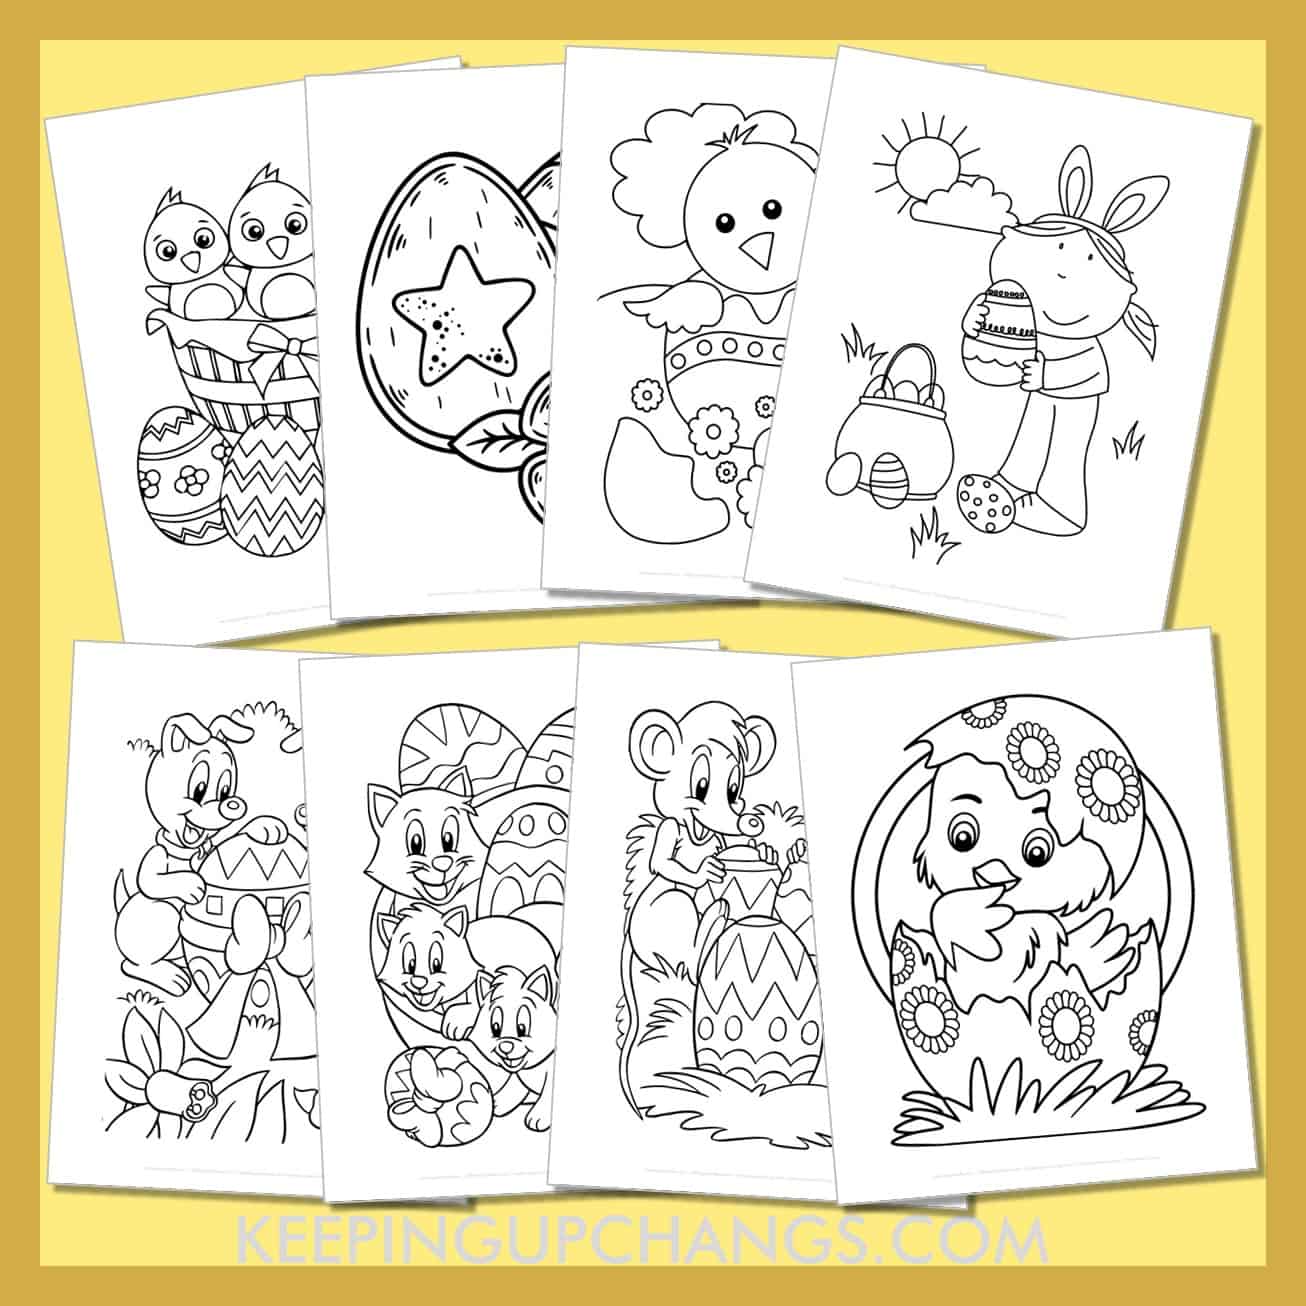 free easter pictures to color for toddlers, kids, adults.